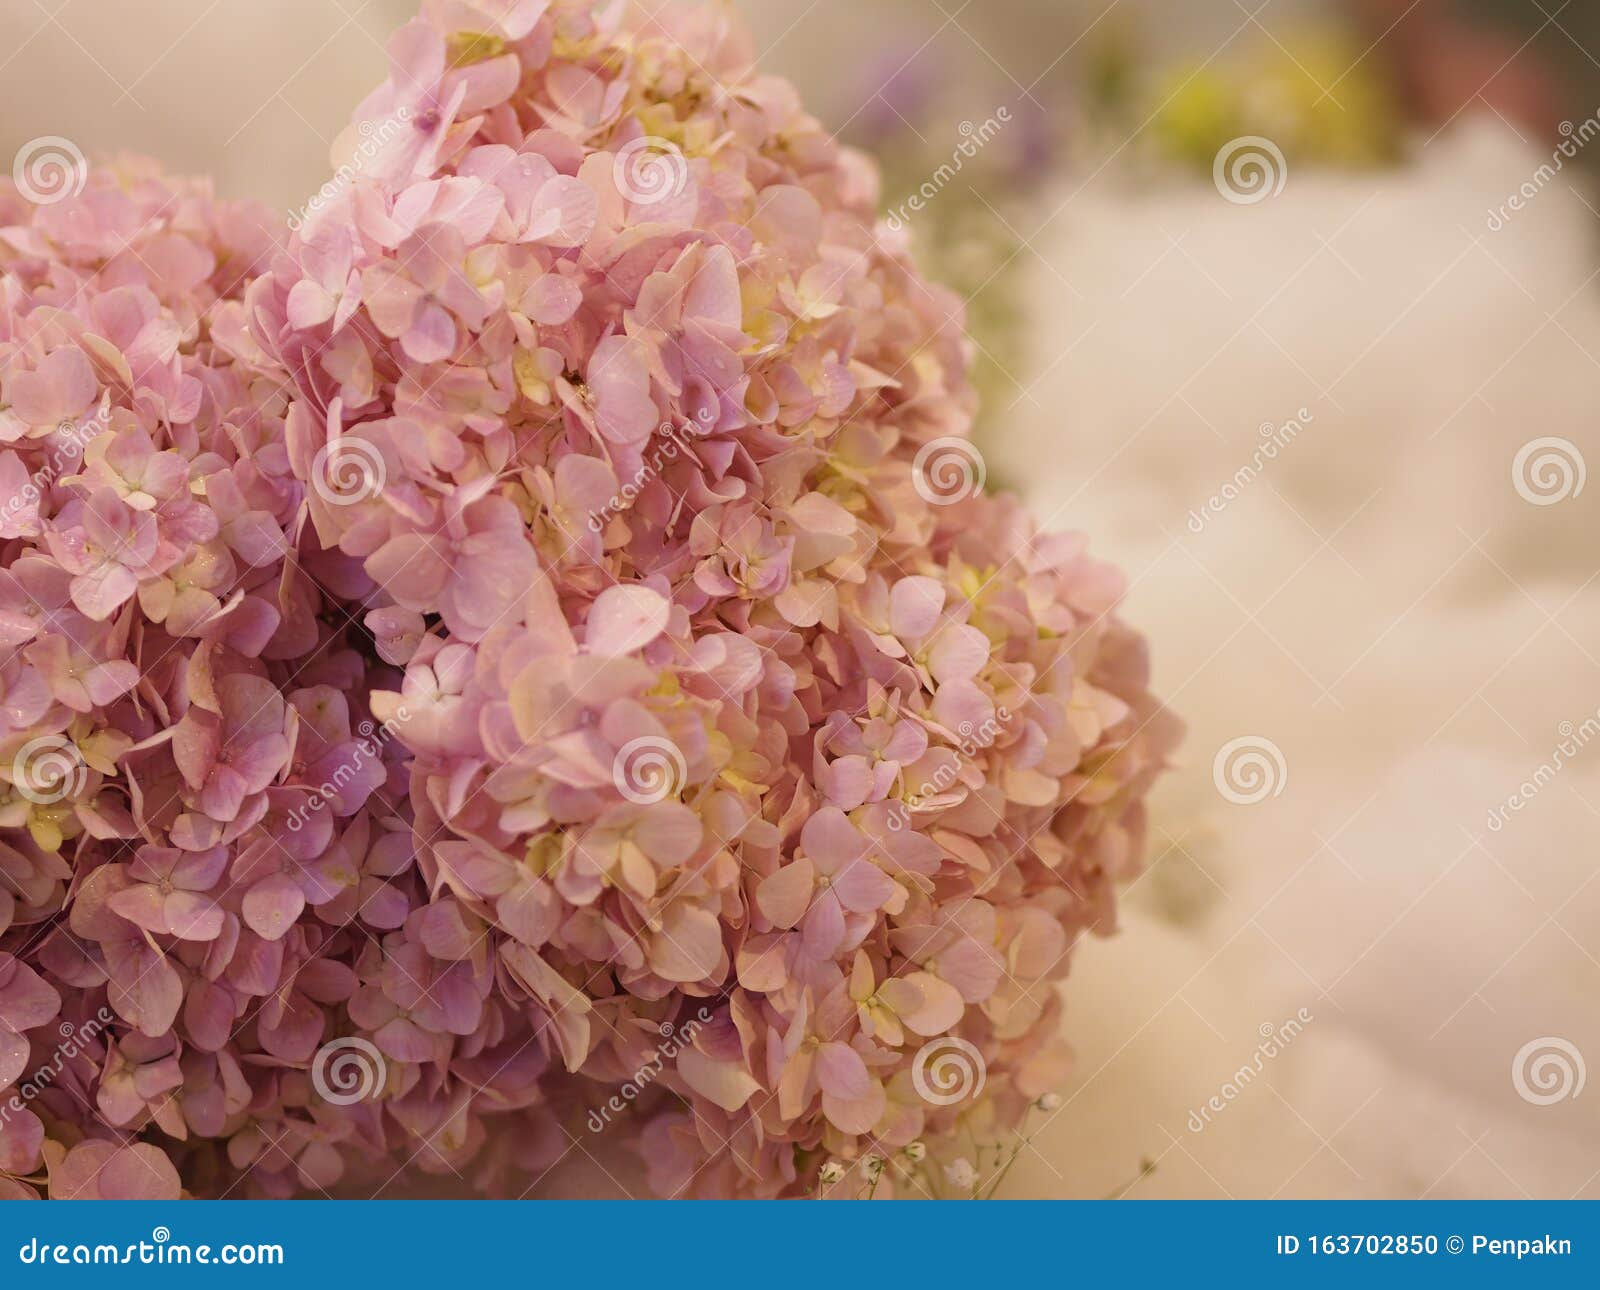 Hydrangea Or Ajisai Pink Flower On Blurred Of Nature Background Stock Photo Image Of Bouquet Agriculture